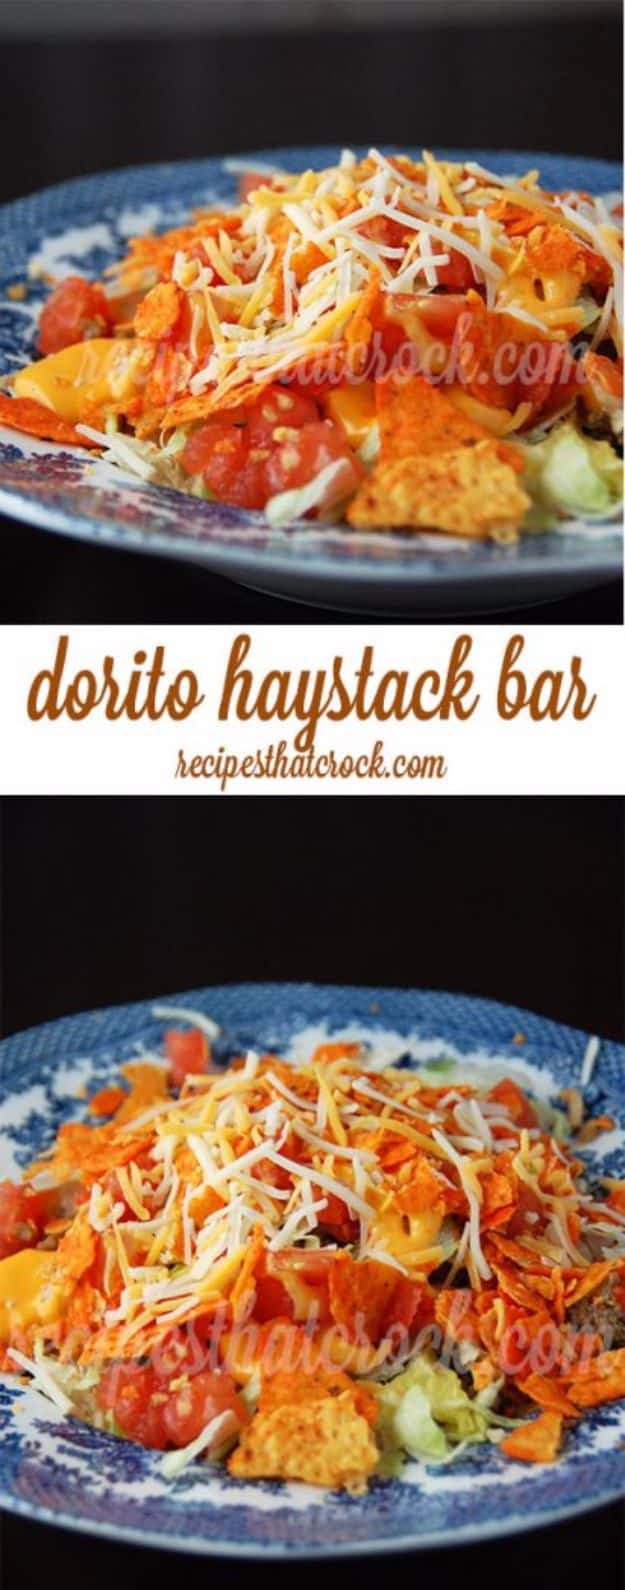 DIY Recipes Made With Doritos - Dorito Haystack Bar - Best Dorito Recipes for Casserole, Taco Salad, Chicken Dinners, Beef Casseroles, Nachos, Easy Cool Ranch Meals and Ideas for Dips, Snacks and Kids Recipe Tutorials - Quick Lunch Ideas and Recipes for Parties 